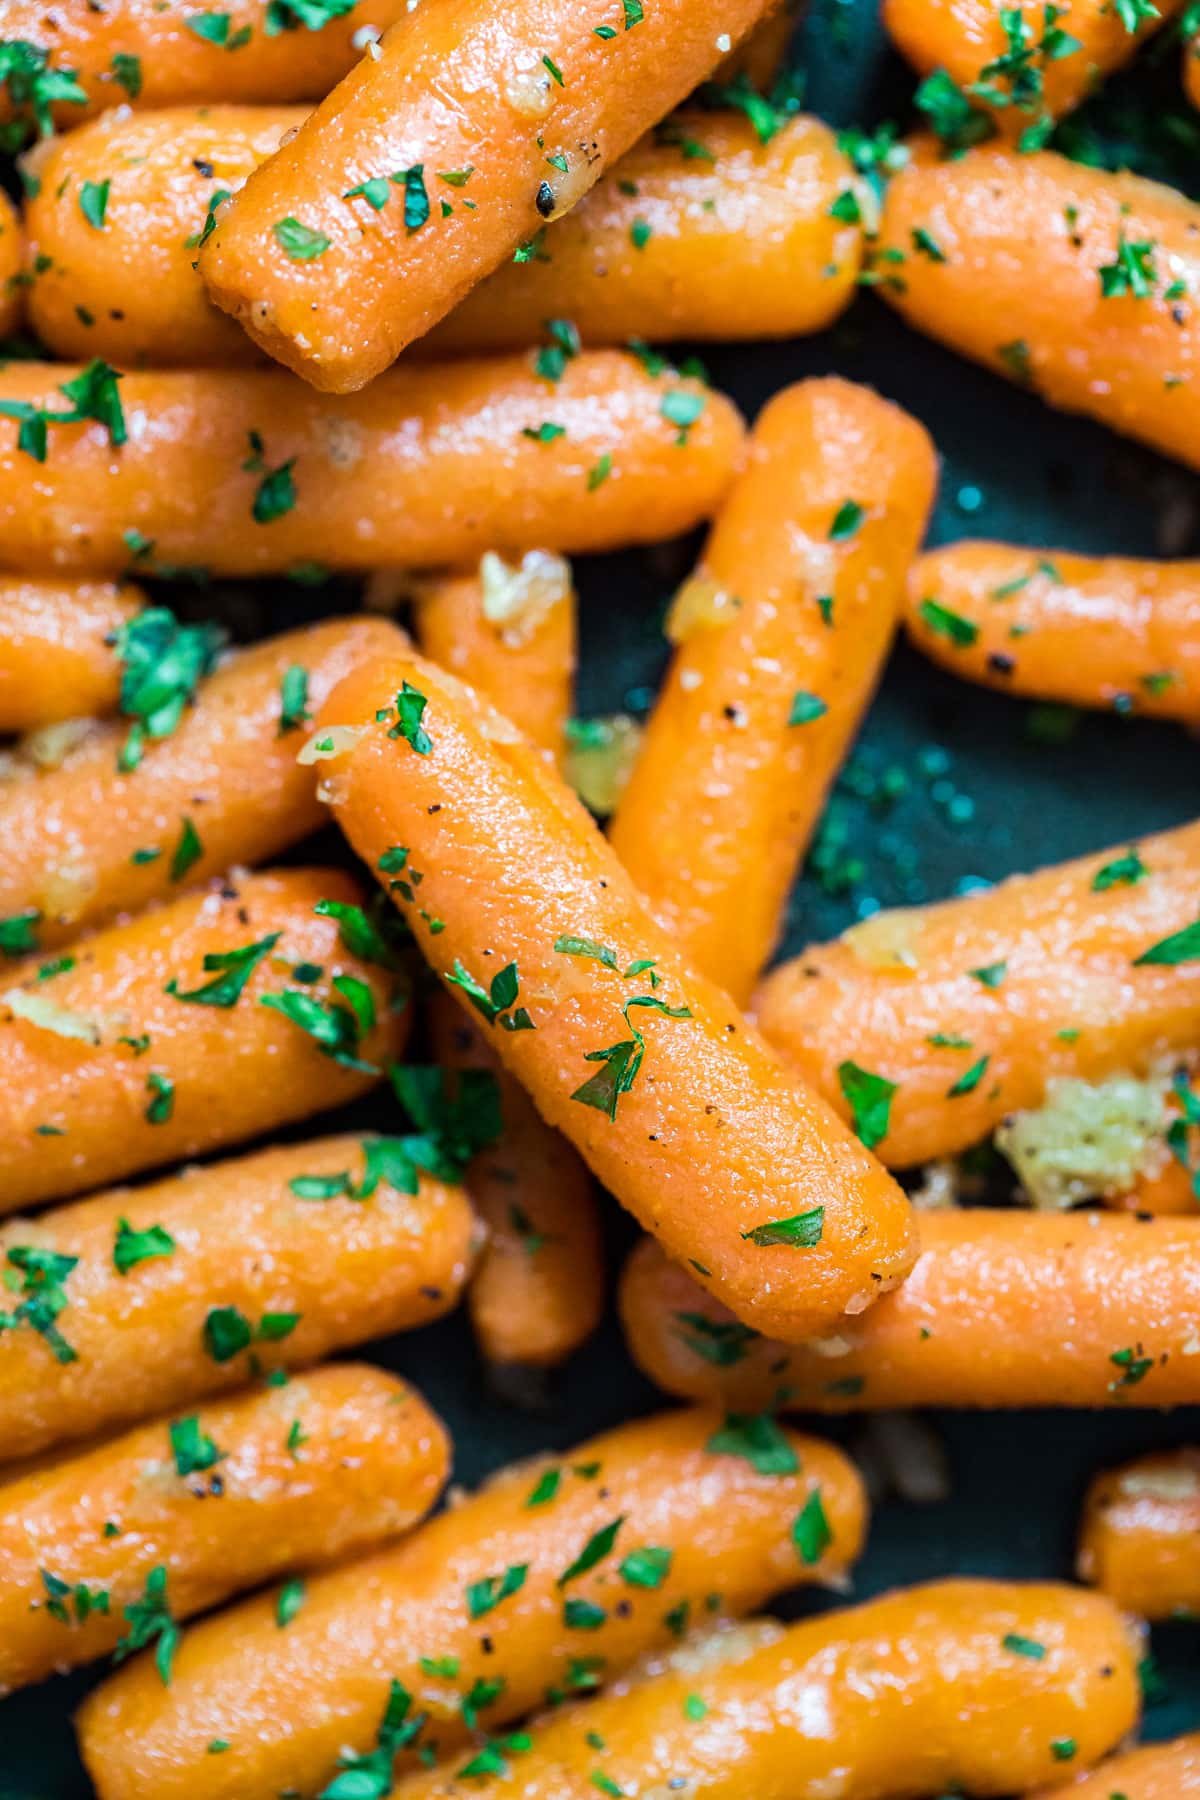 A close up overhead image of the sauteed carrots in a pan.